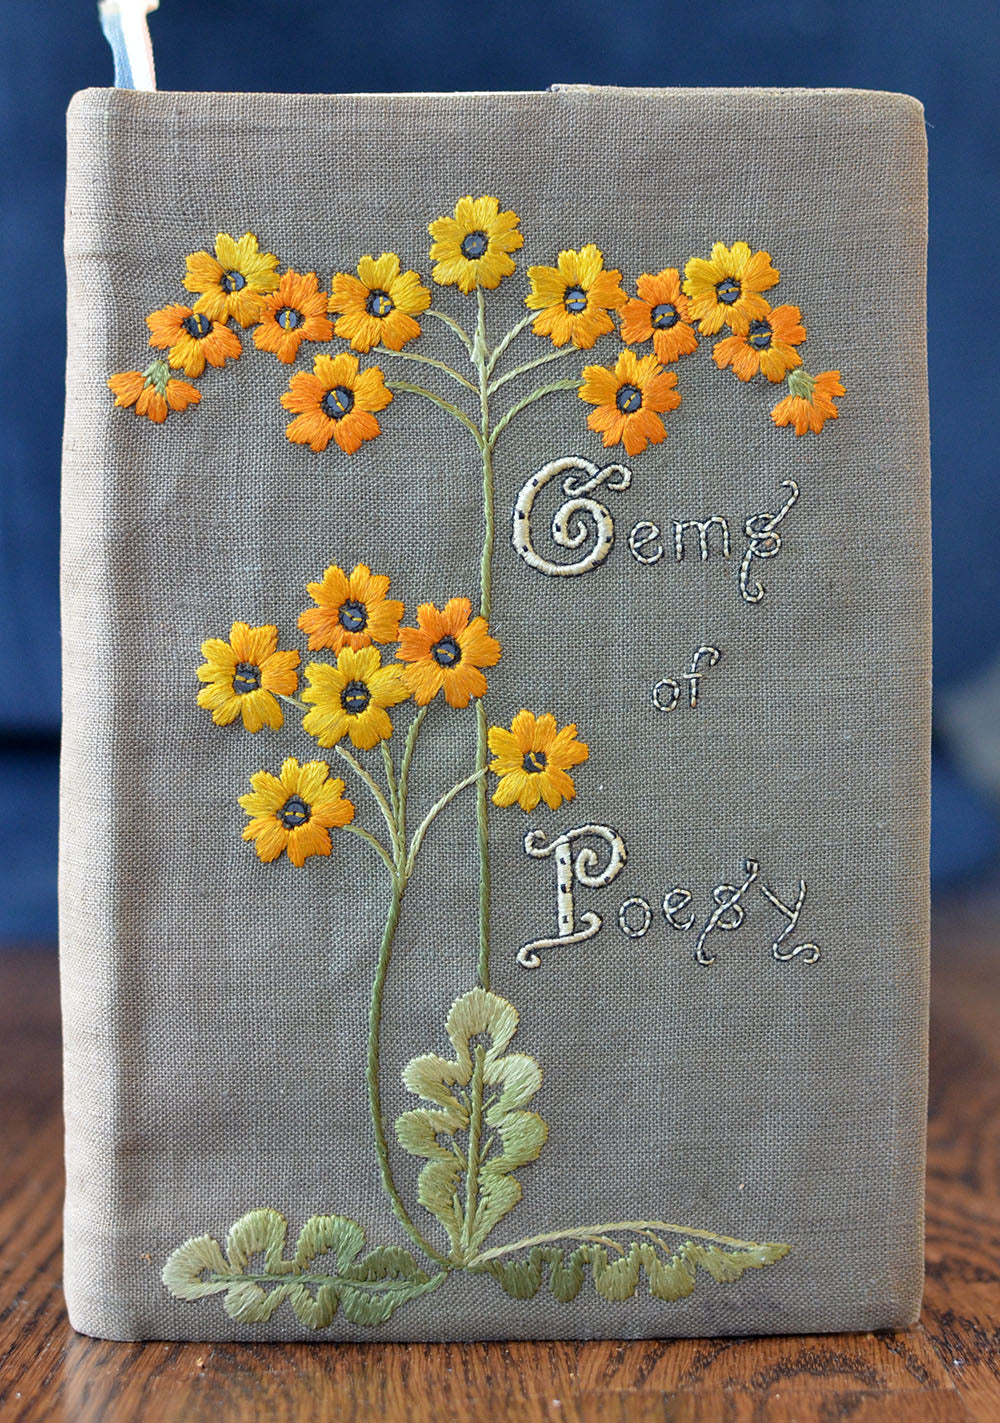 [Embroidered Cover] Gems of Poesy